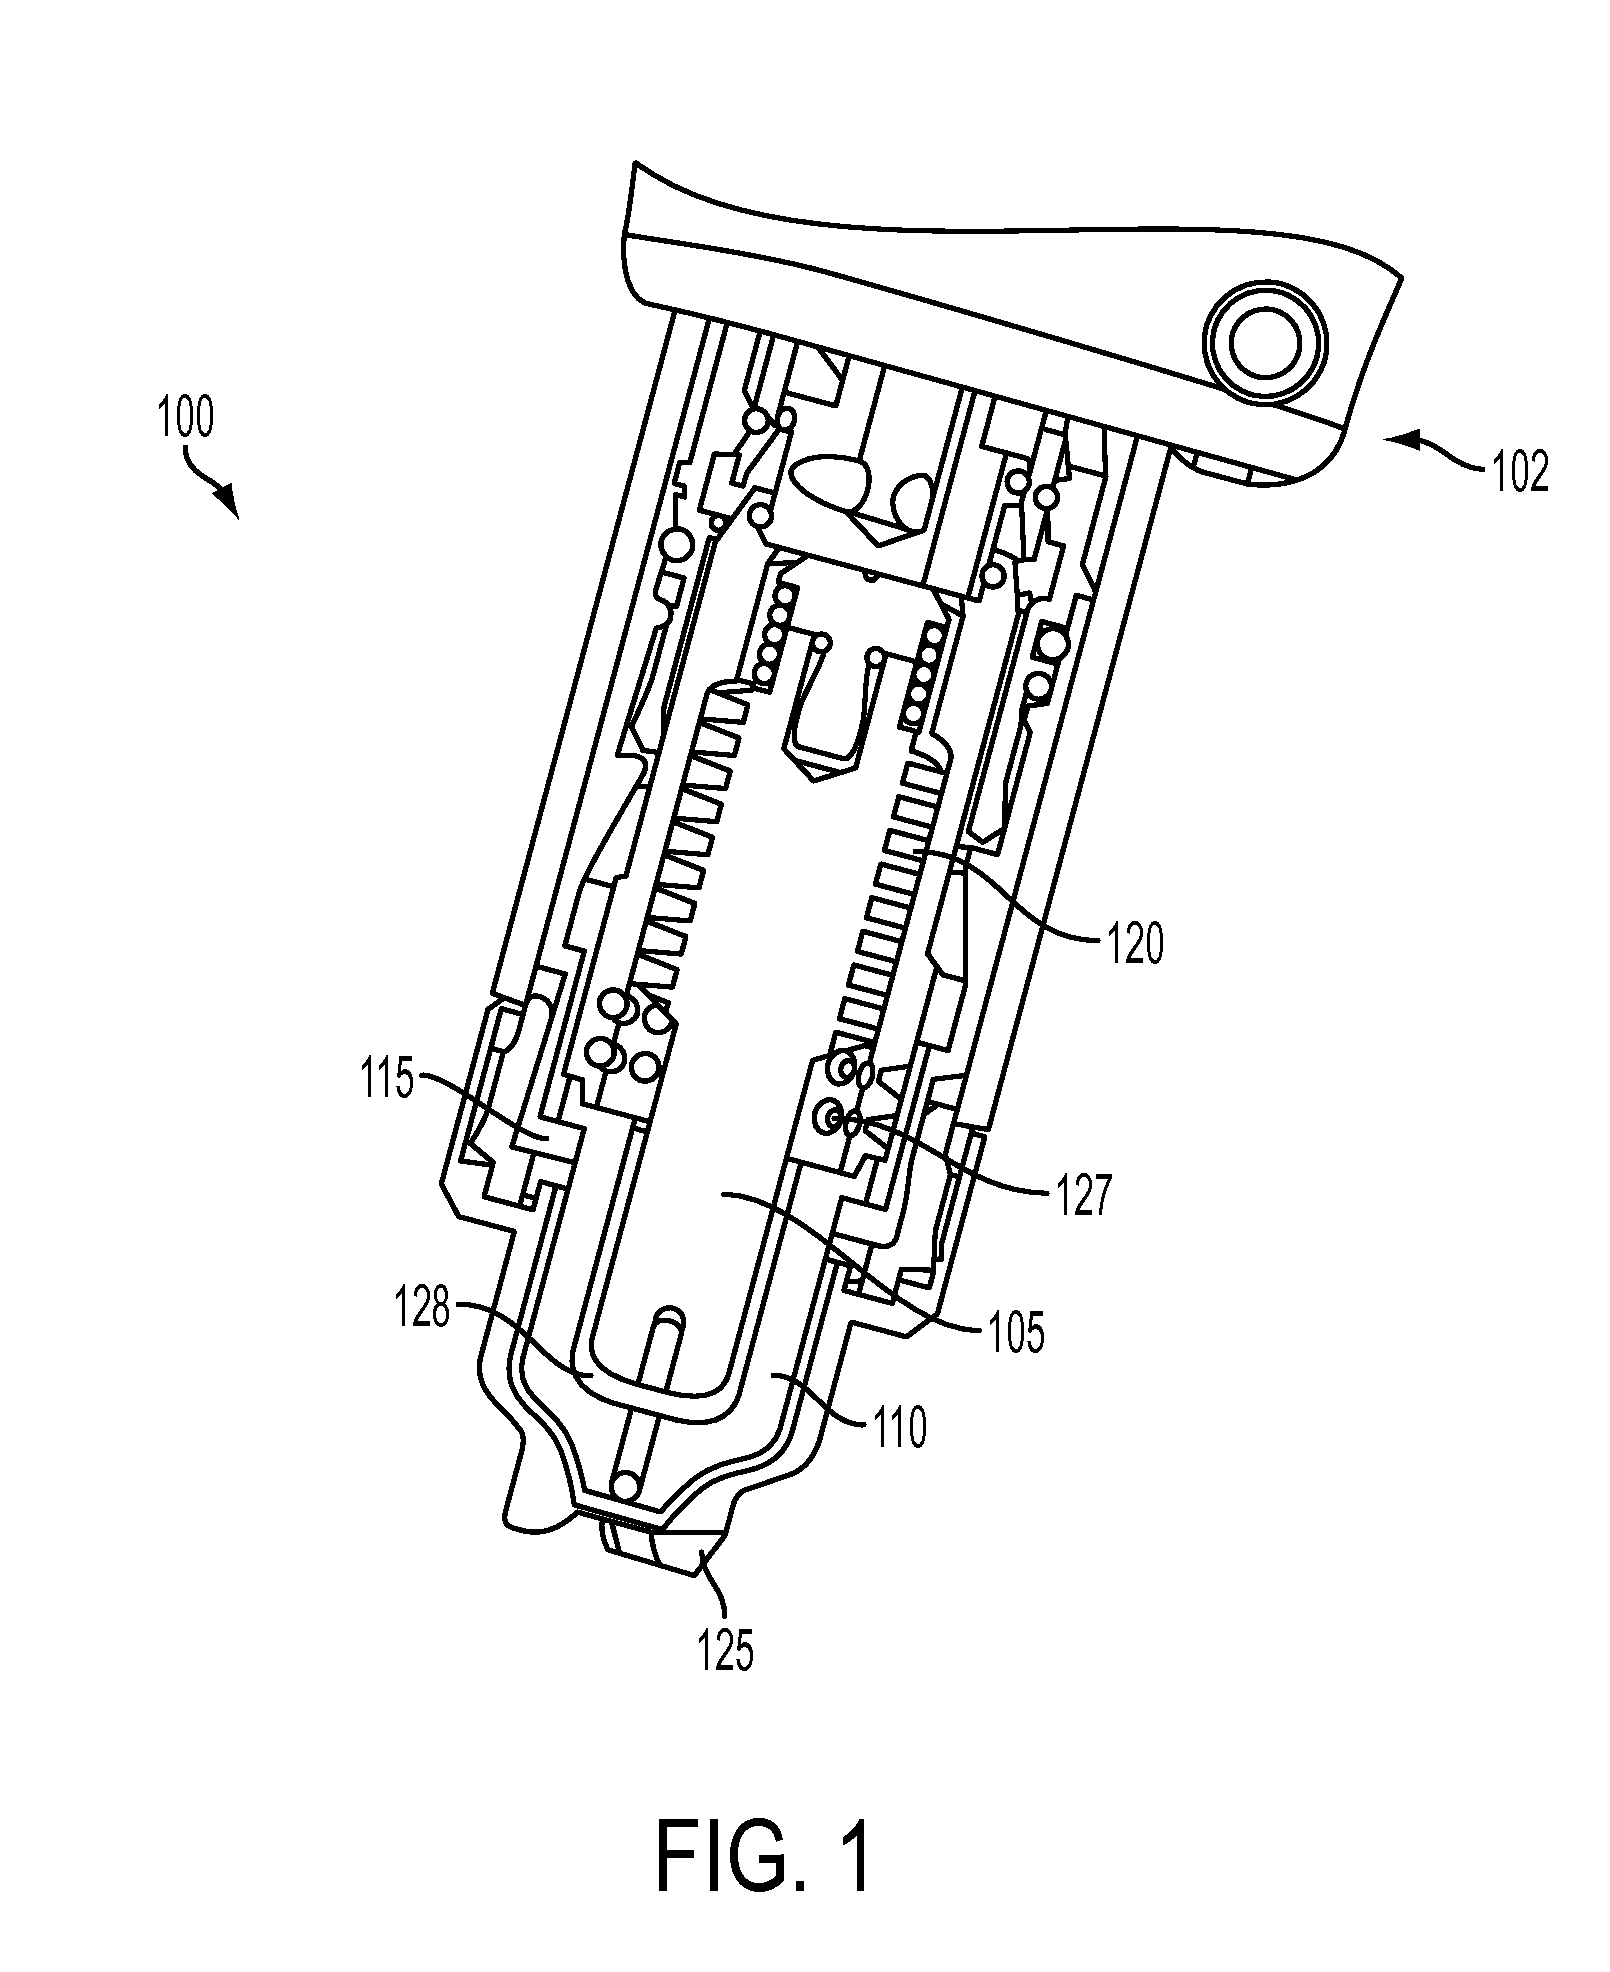 Torch Flow Regulation Using Nozzle Features